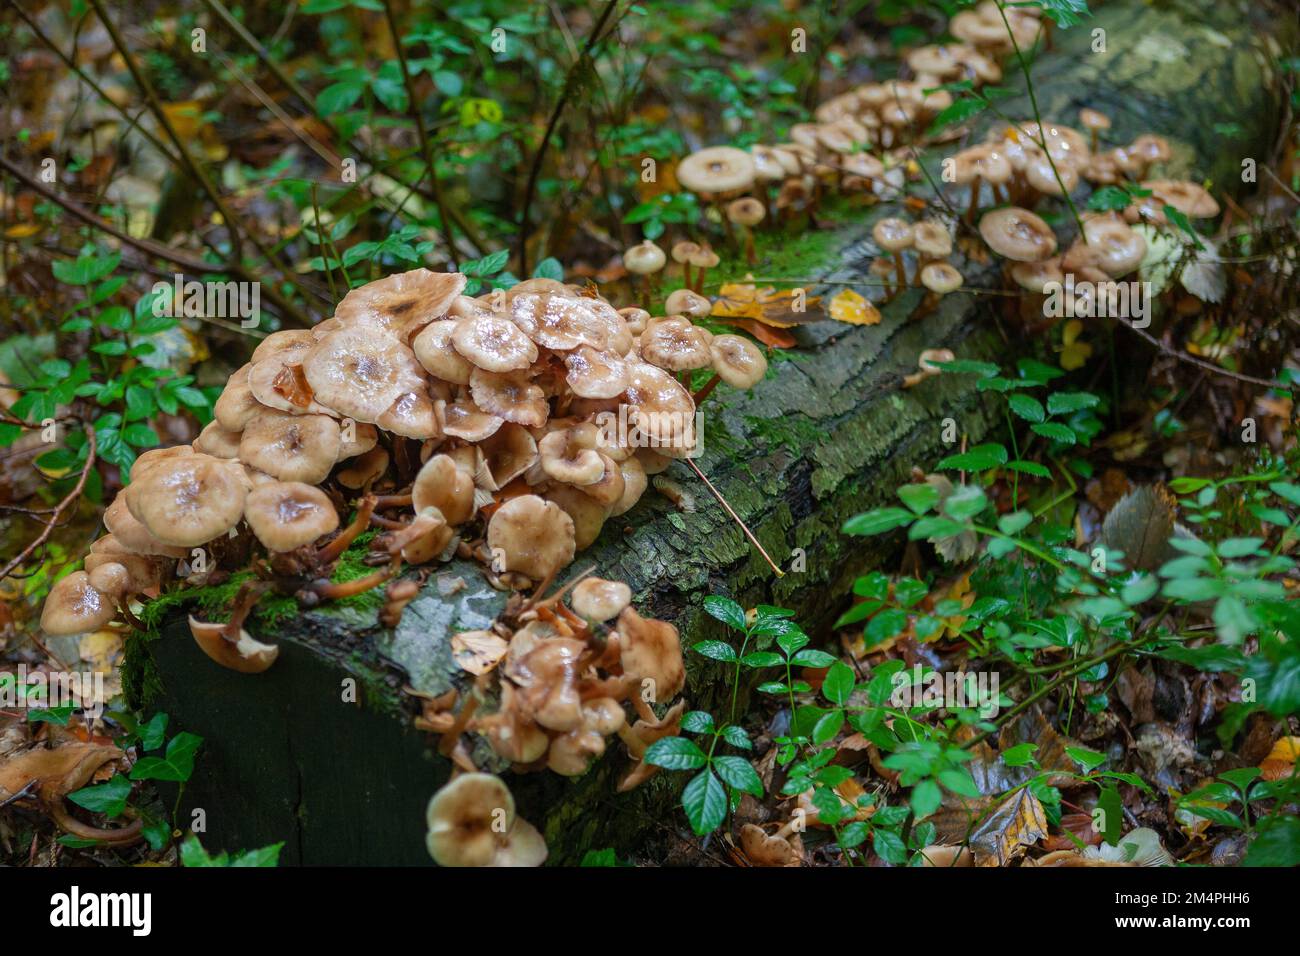 Fungi on a fallen log: Hypholoma fasciculare, commonly known as the sulphur tuft or clustered woodlover: West Walk, Forest of Bere, Hampshire, UK Stock Photo